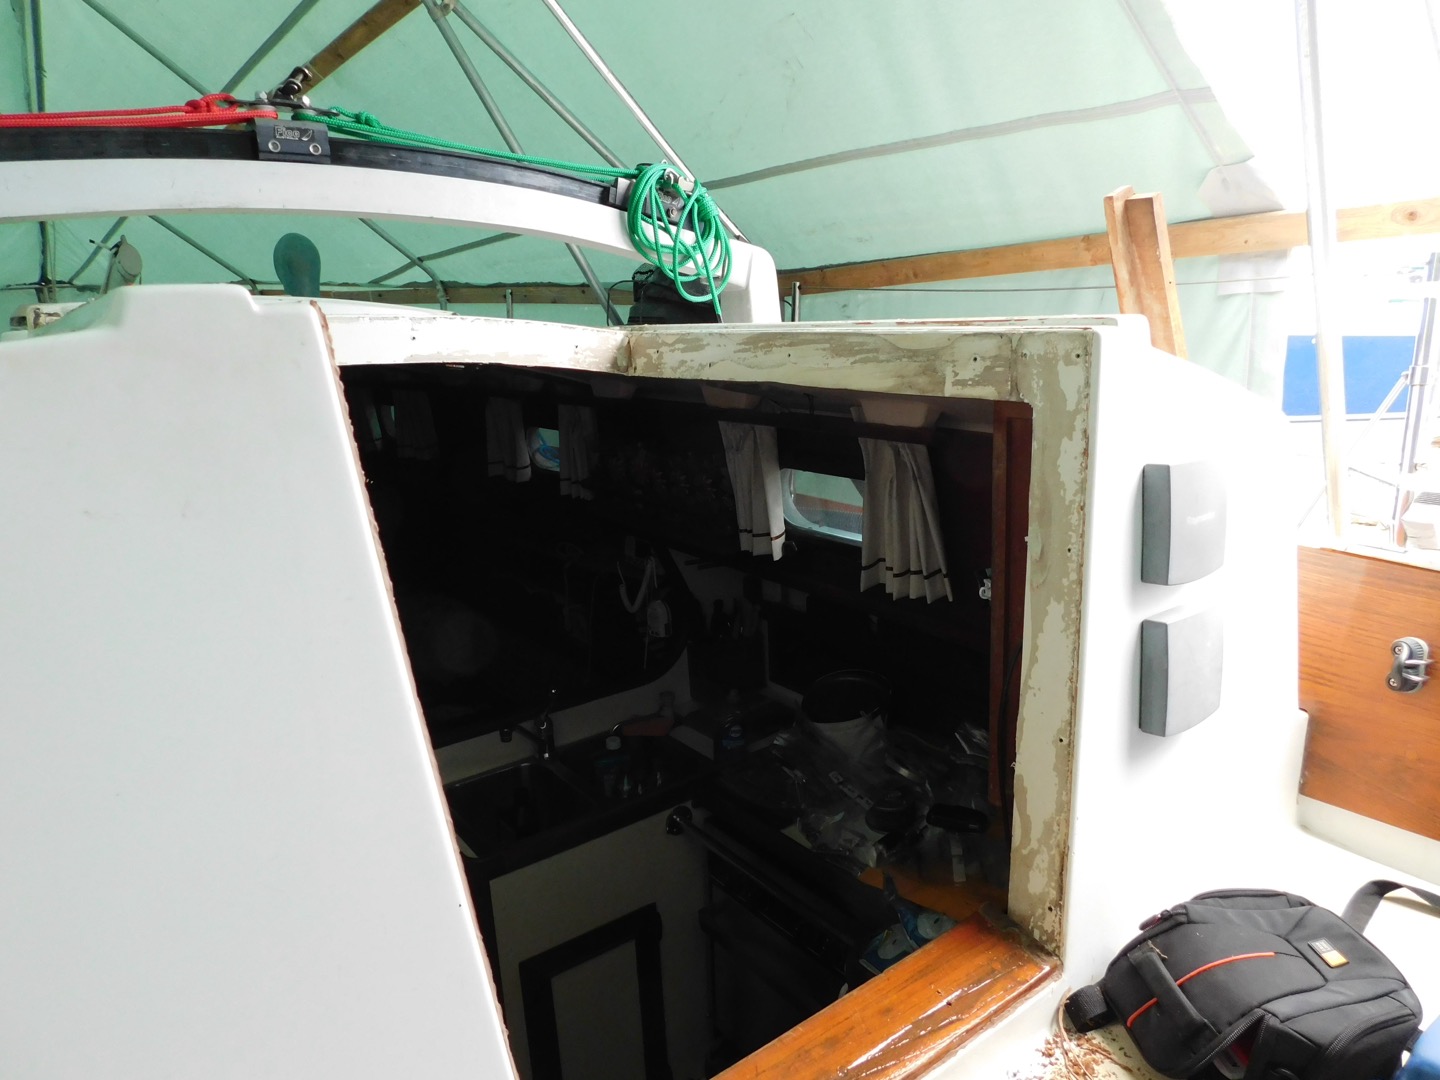 Companionway trim removed, threshold still in place